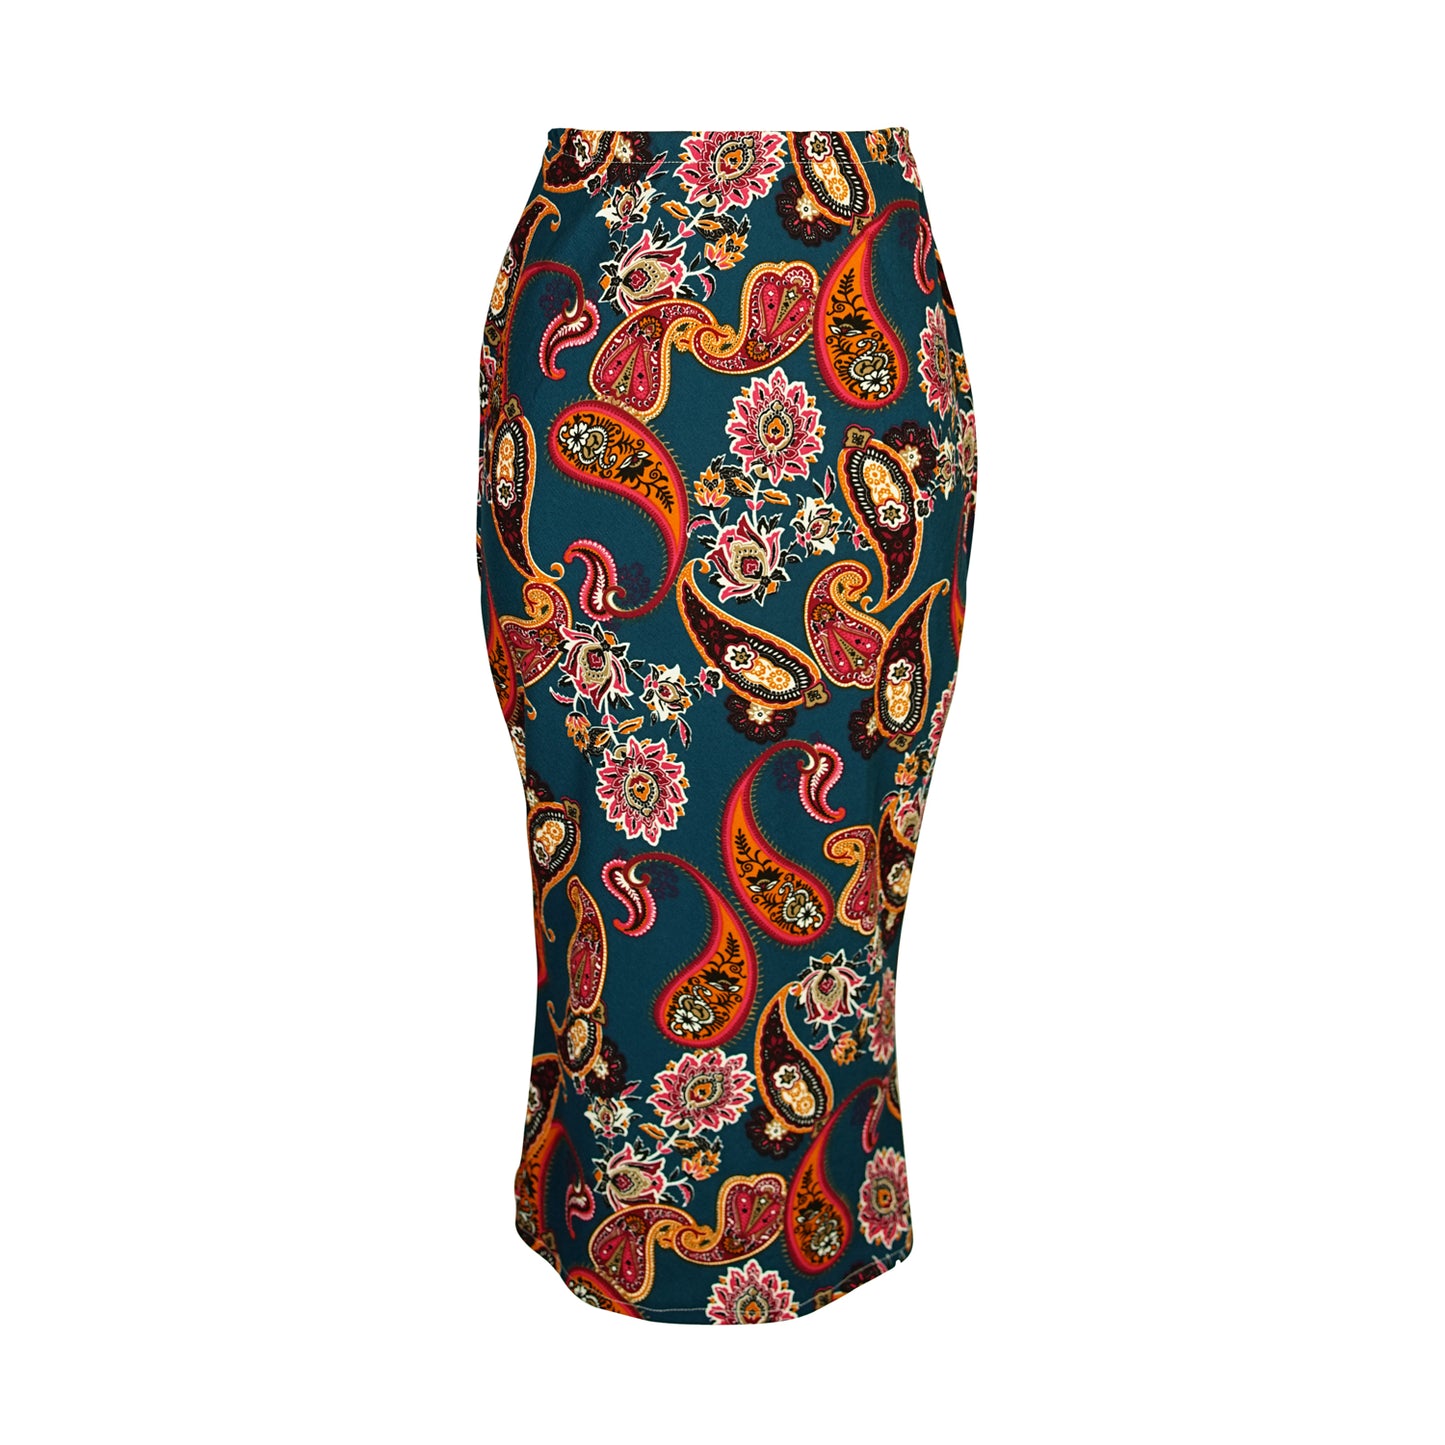 jennafer grace Pepper Paisley Pencil Skirt dark cyan teal with red orange black white floral paisley midi skirt boho bohemian hippie romantic whimsical summer outfit matching set coord co-ord handmade in California USA